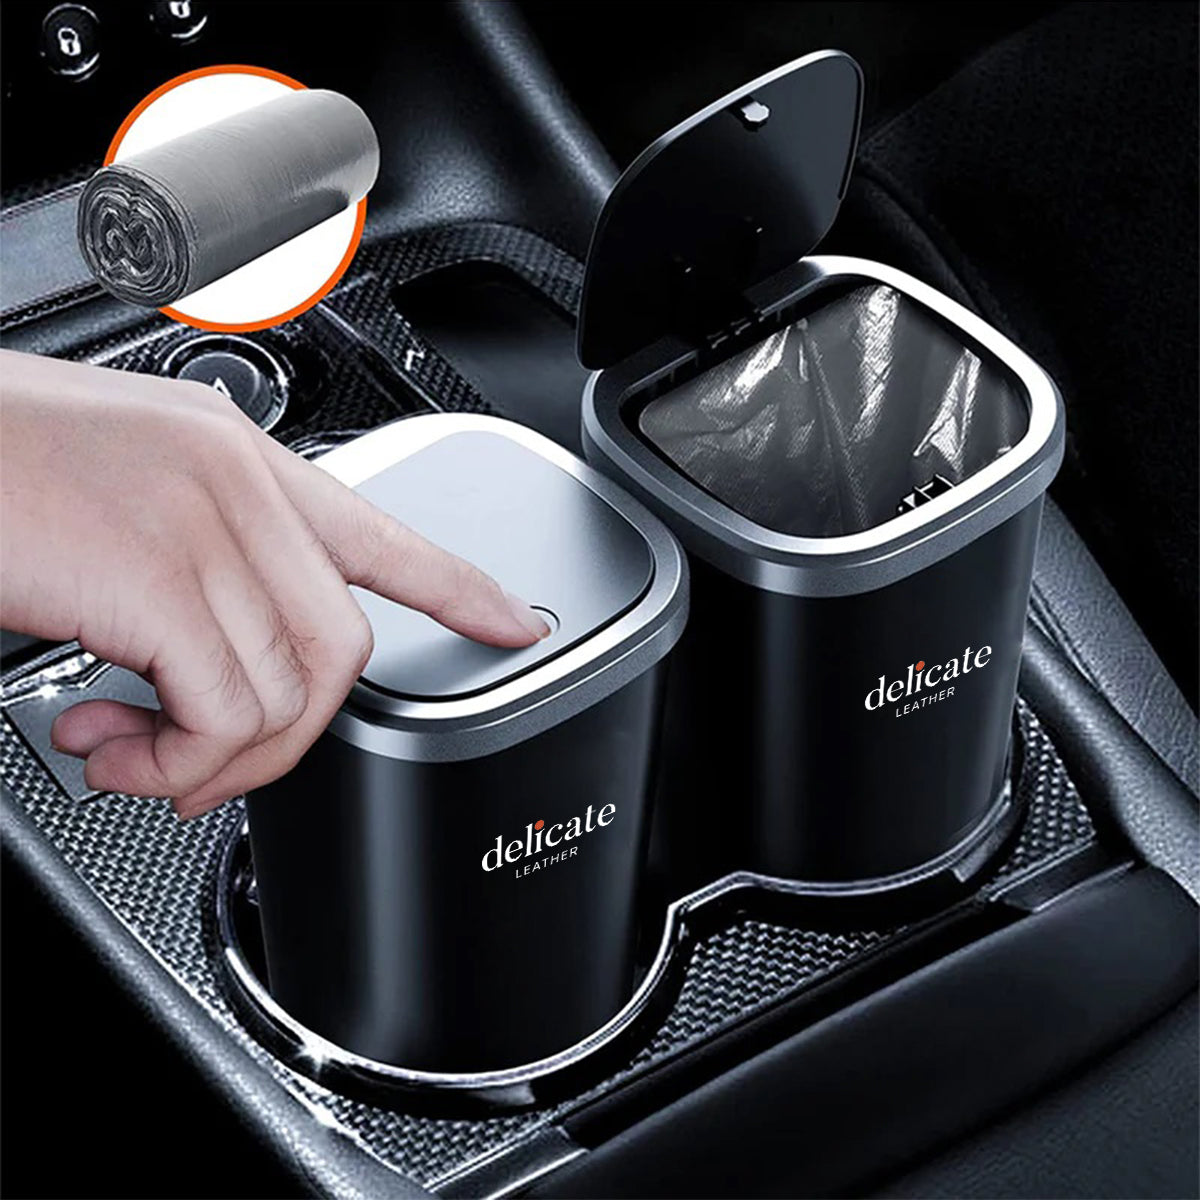 Car Trash Cans, Custom For Your Cars, Compact & Durable Car Accessories for Interior Use 2 Pack, Practical Car Organizers and Storage Cups with Pop-Up Open, Car Accessories LR11993 - Delicate Leather